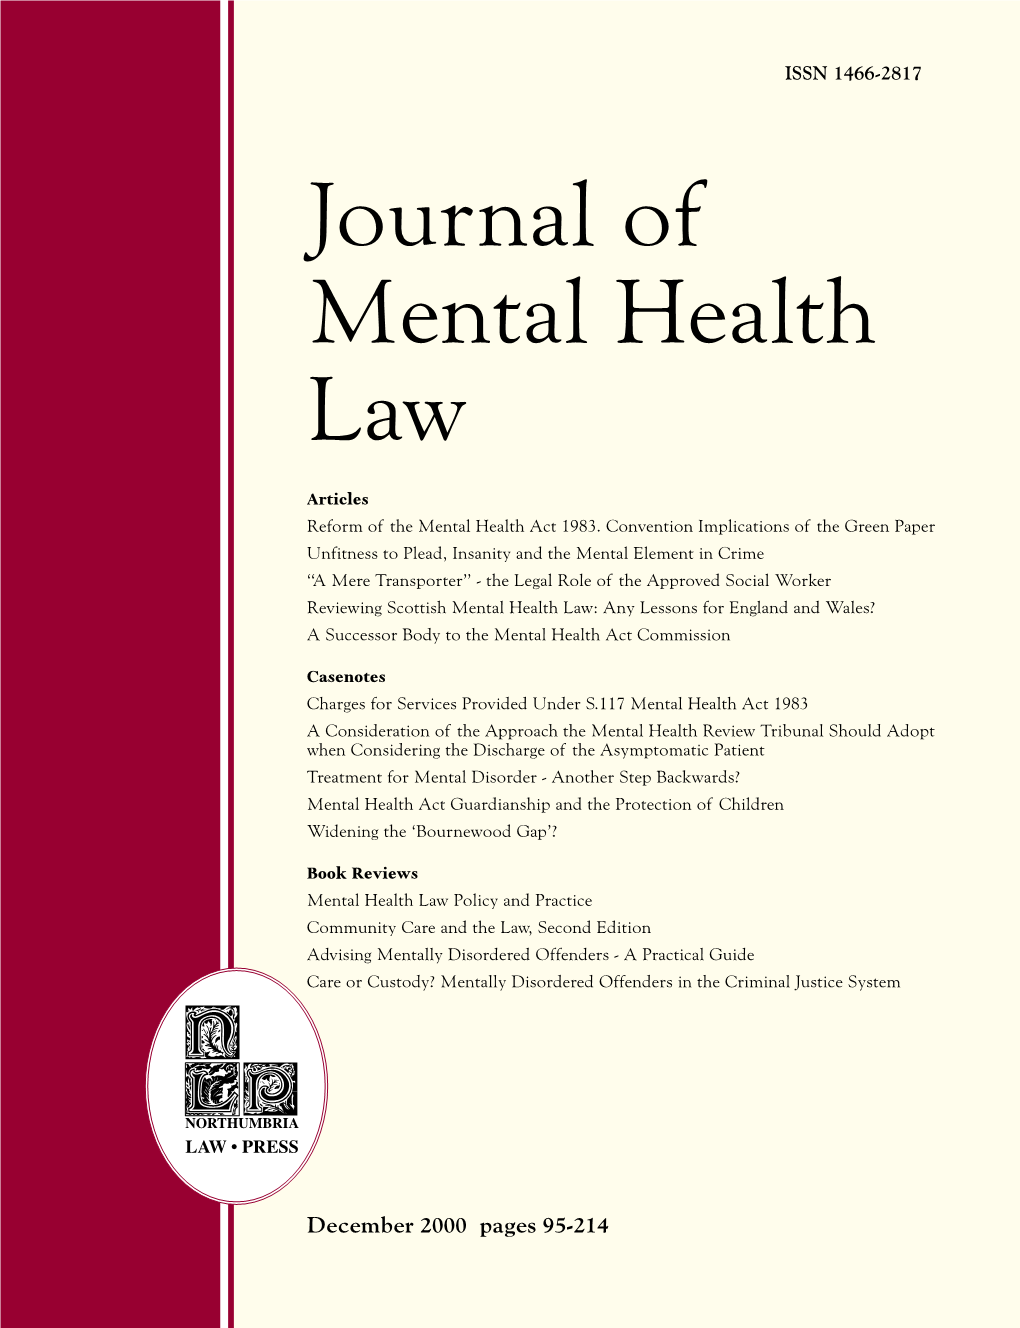 Journal of Mental Health Law